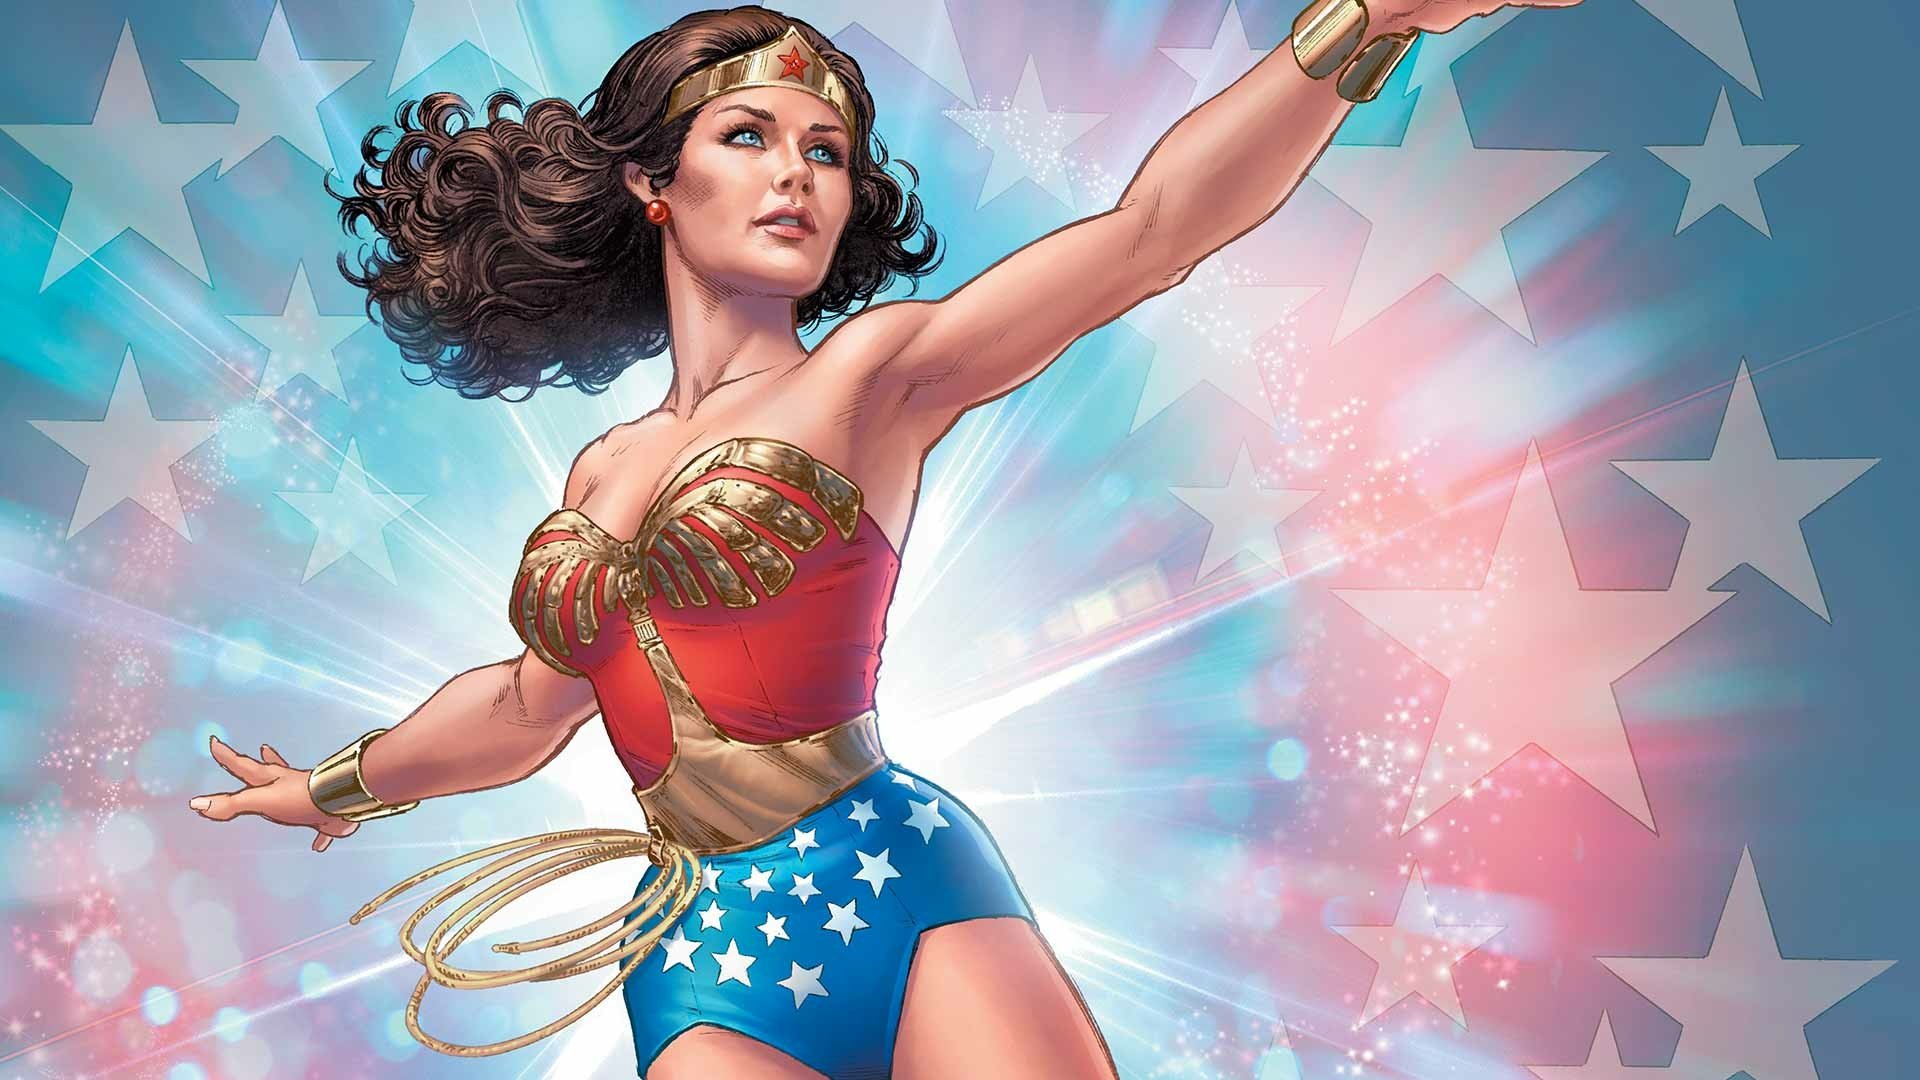 Wonder woman hd wallpapers hd images backgrounds